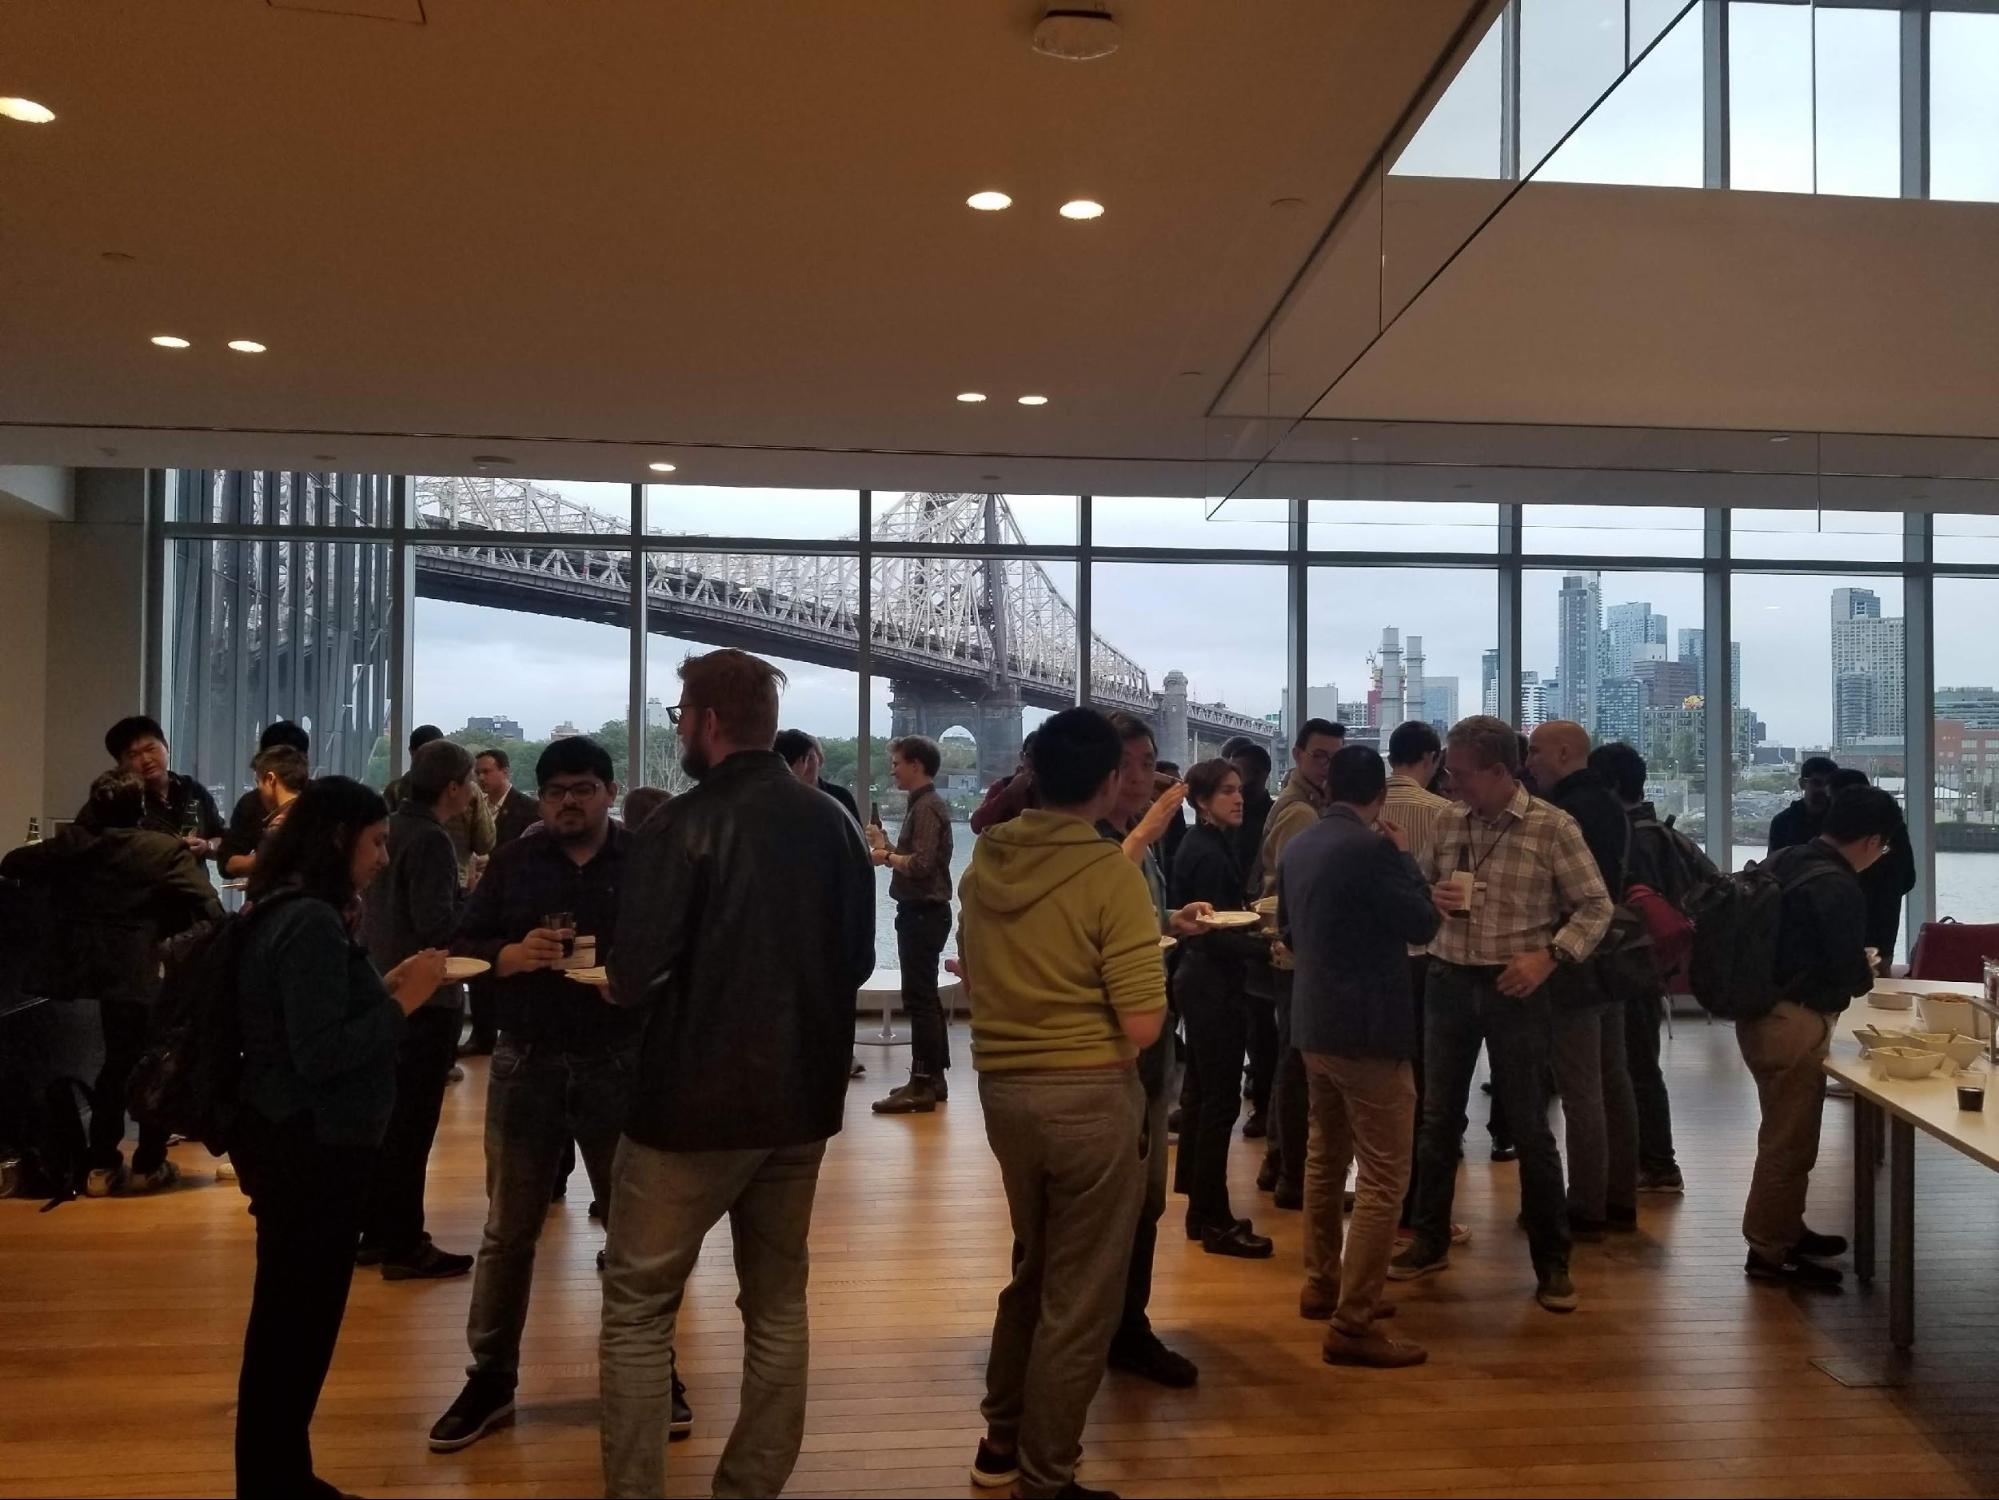 2019 NPI Fall Retreat attendees chat during the Reception at the end of the day in the Tata Innovation Center at Cornell Tech.
The Queensboro Bridge, the East River and Queens are in the background.